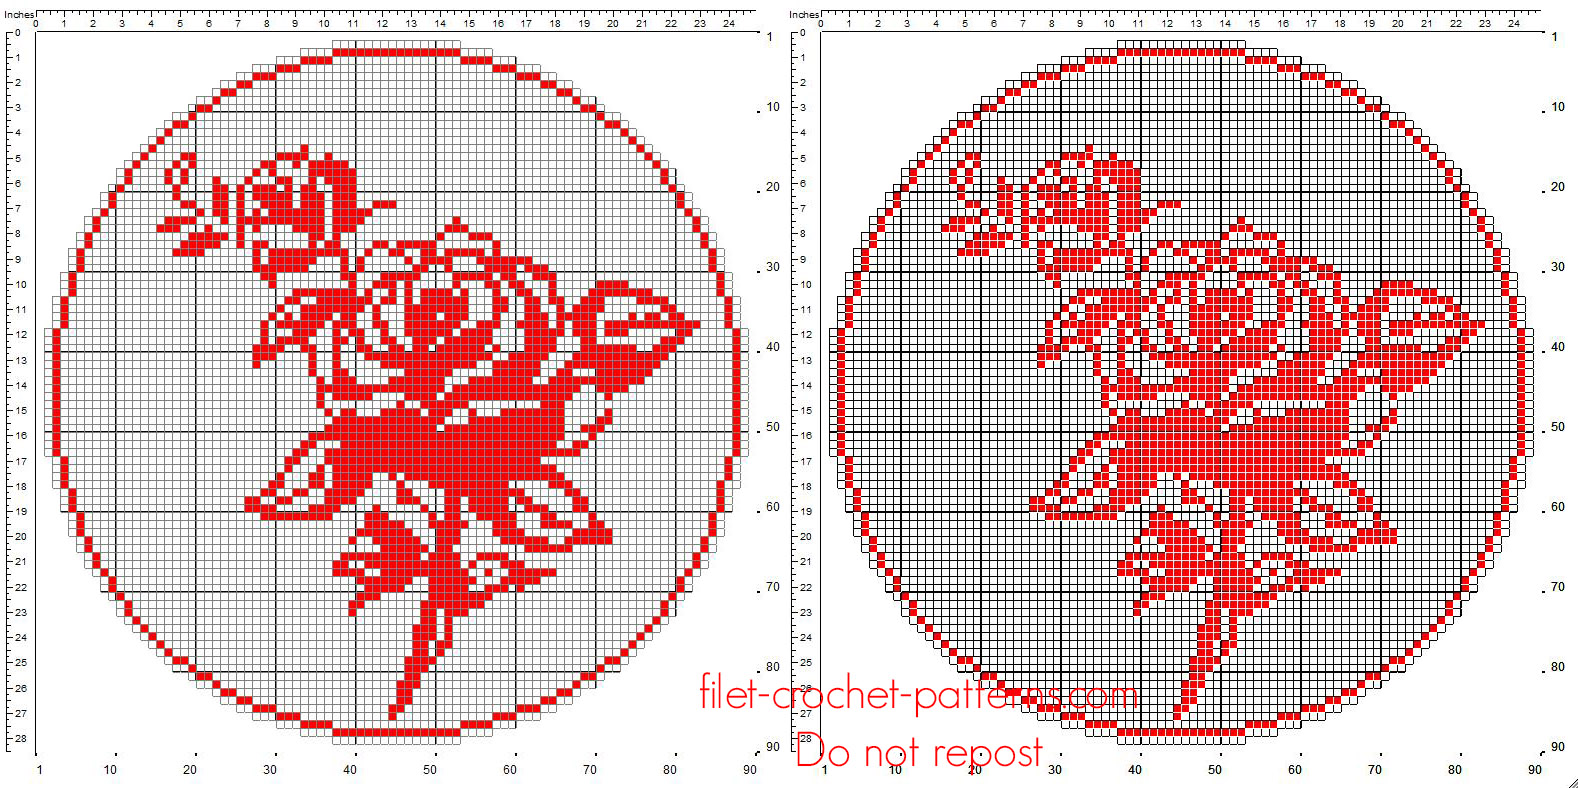 Free filet crochet pattern round doily red color with roses size 90 squares